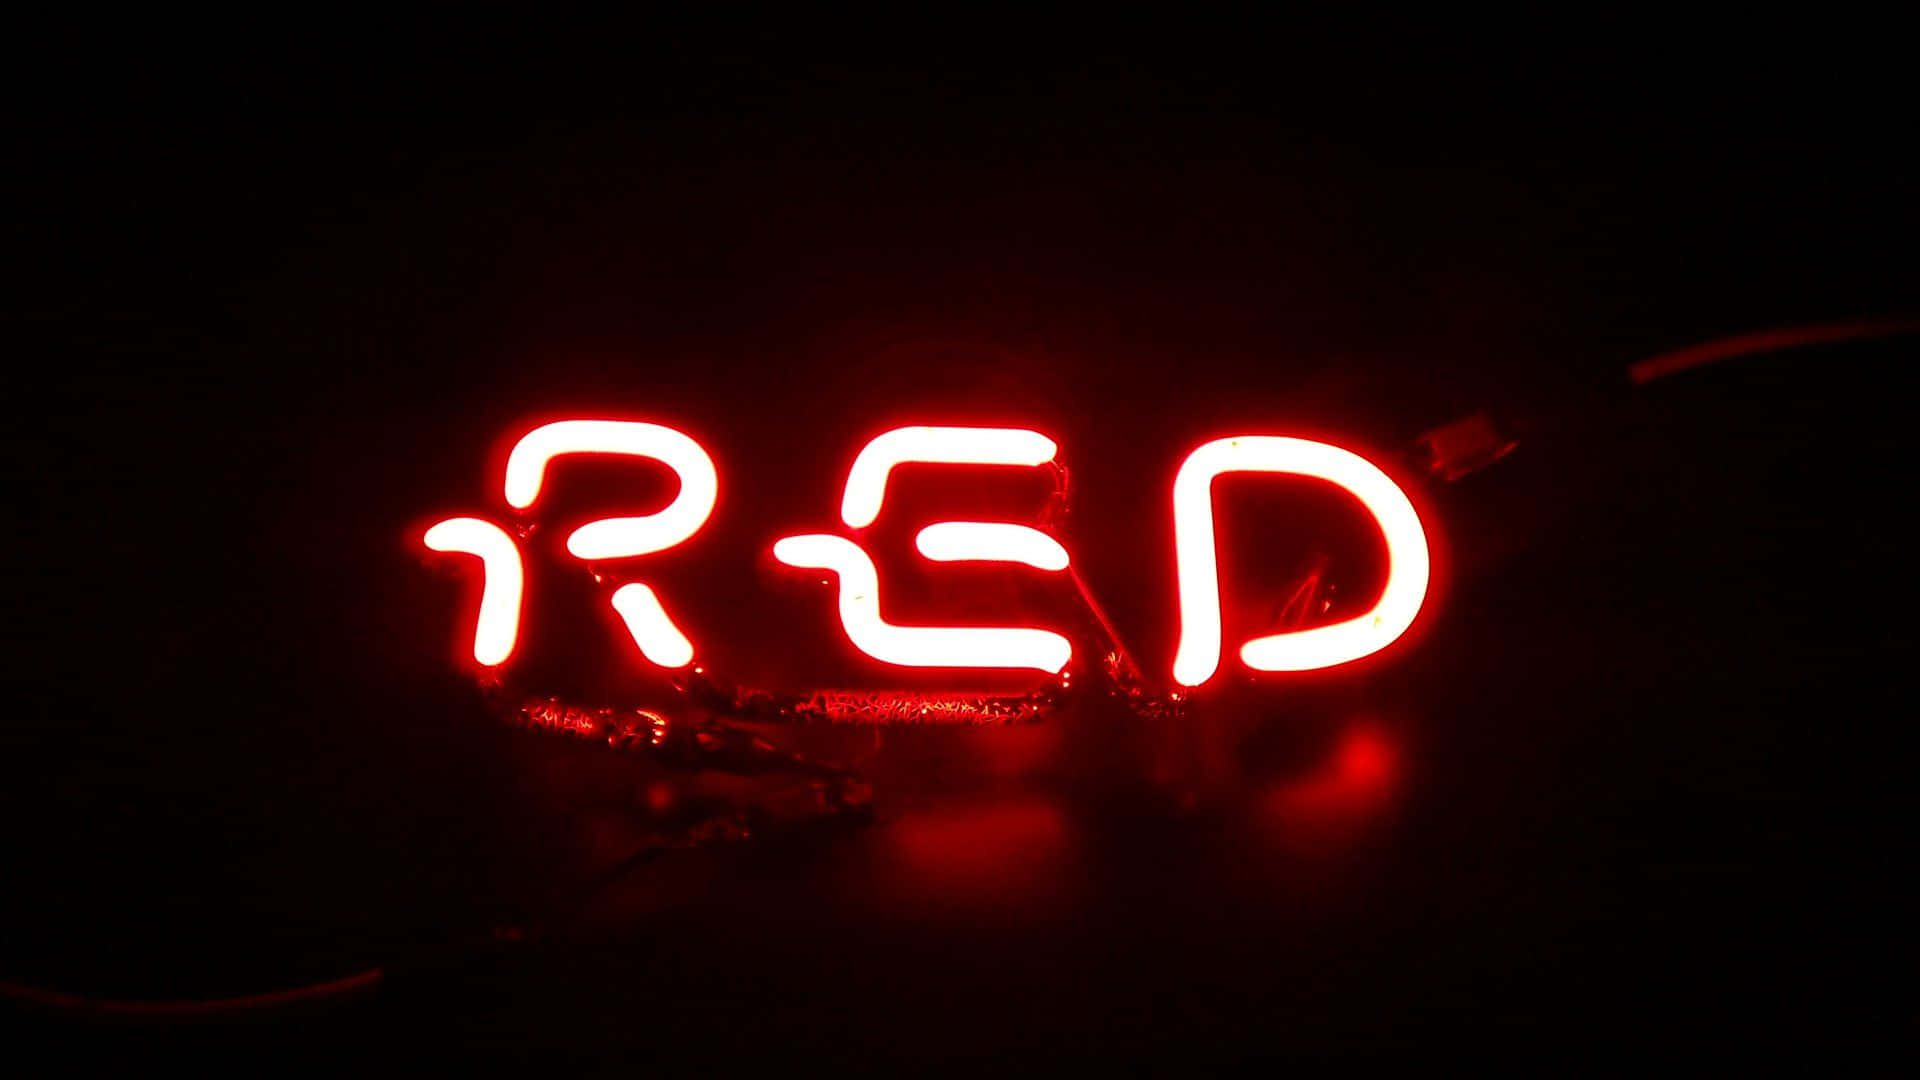 3D Neon Red LED Light Sign Picture